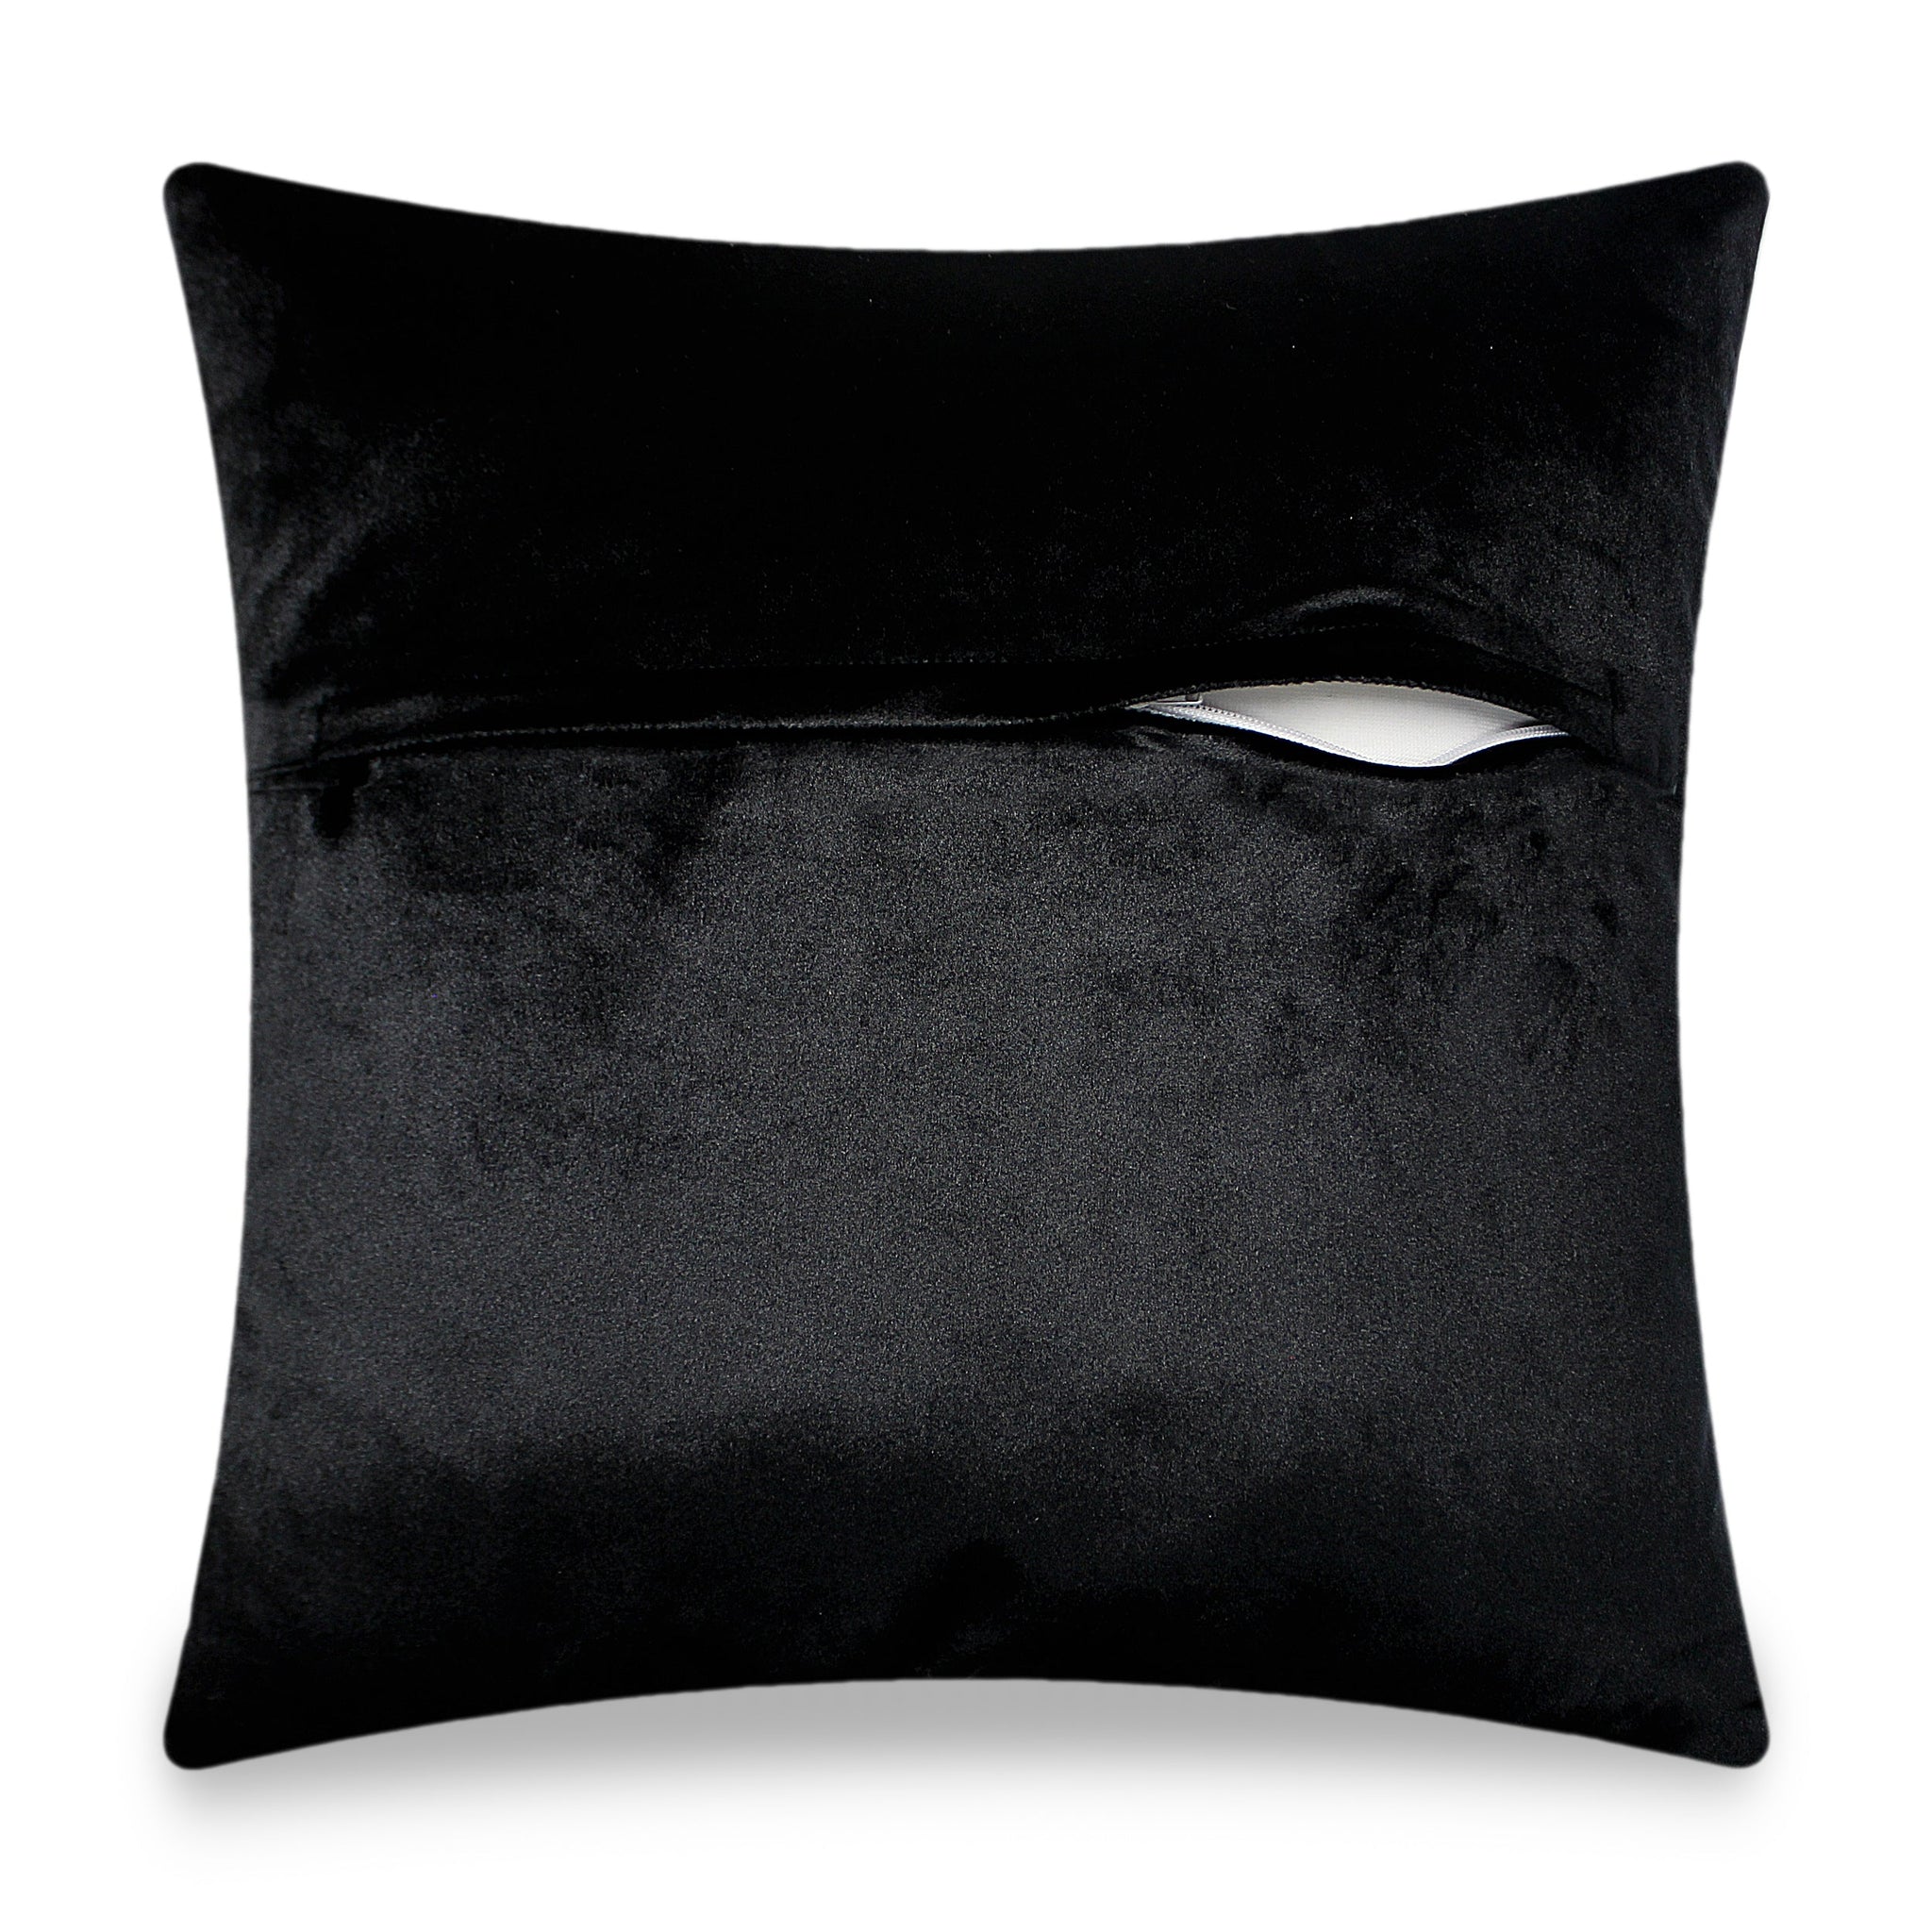 Black Velvet Cushion Cover Rope Love Embroidery Decorative Pillow Modern Home Decor Throw Pillow for Sofa Chair Living Room 45x45 cm 18x18 In